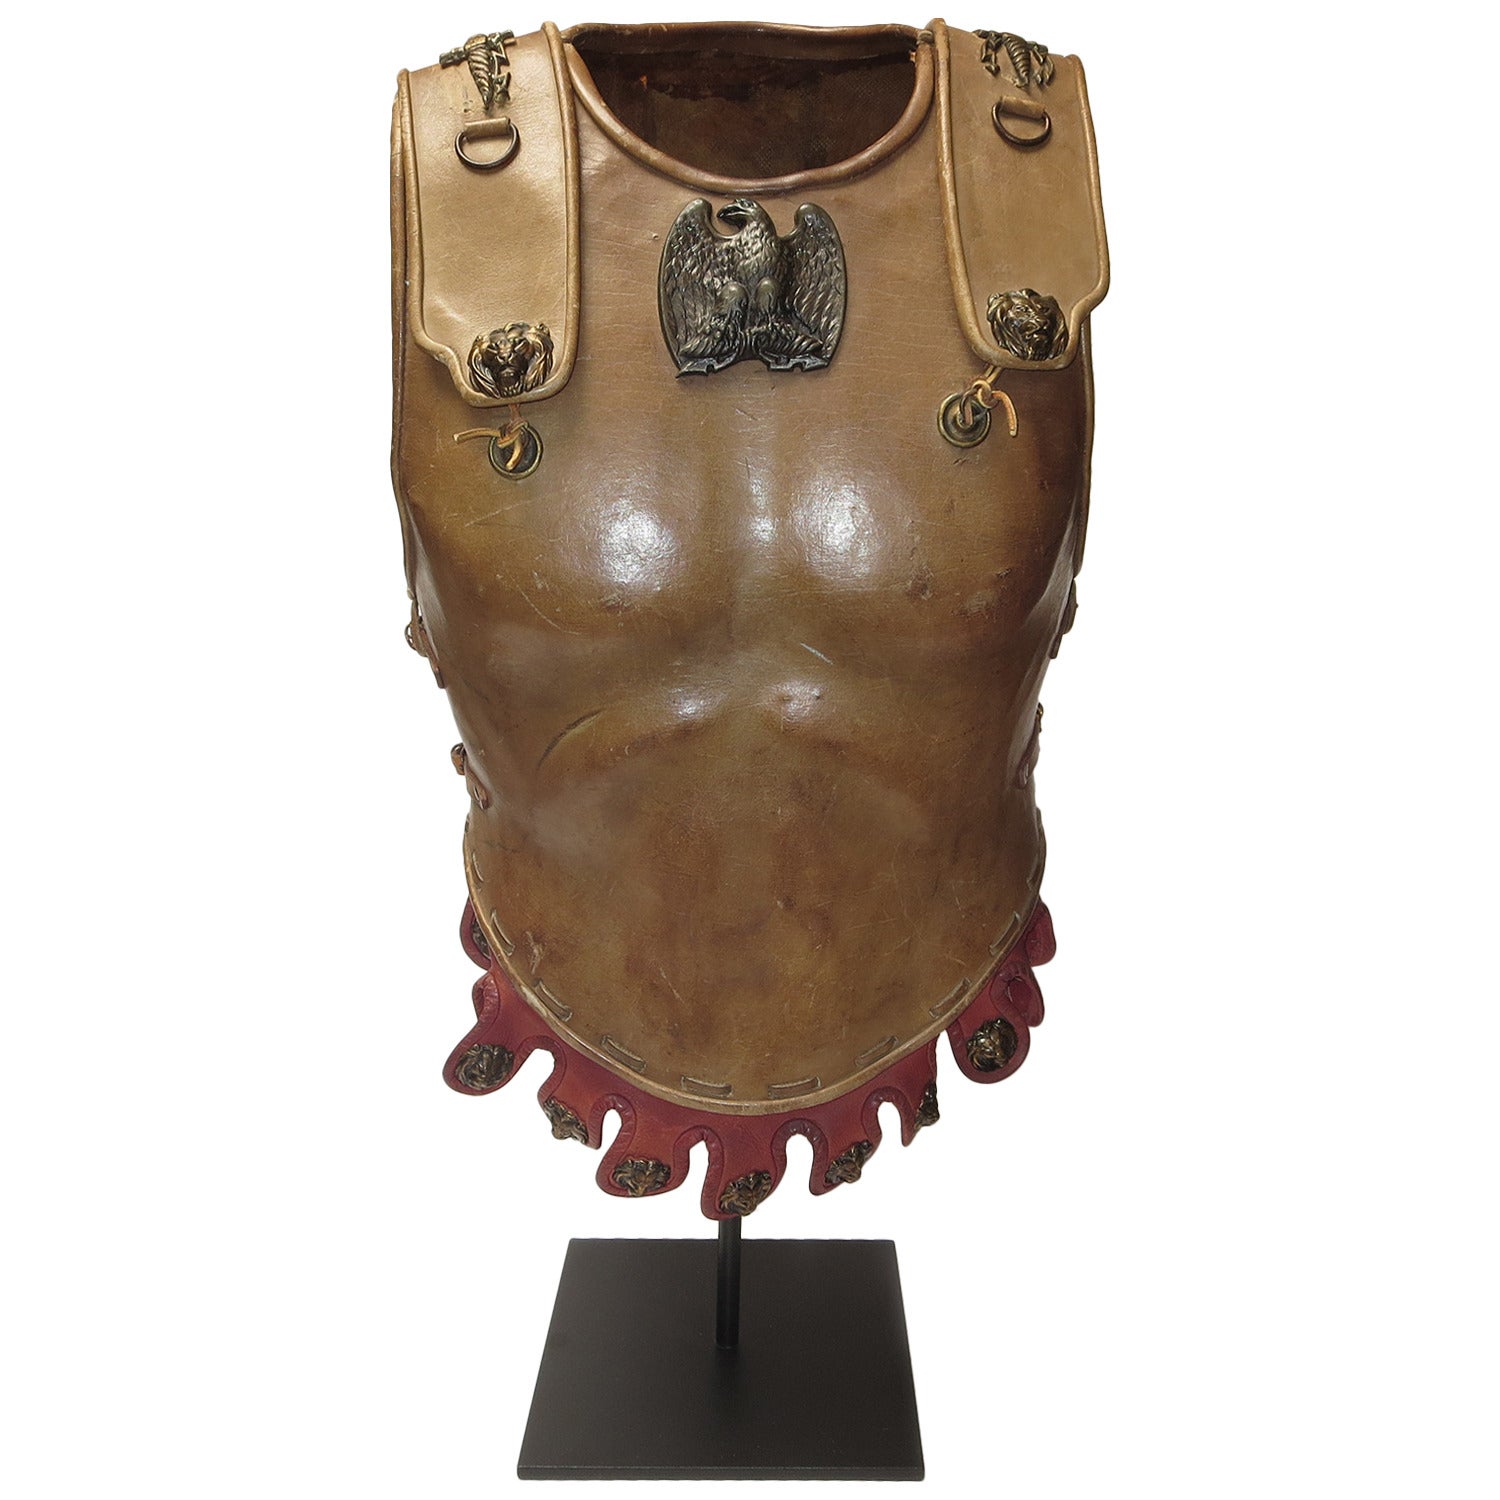 Telly Savalas Leather Chest Plate Prop from "The Greatest Story Ever Told", 1965